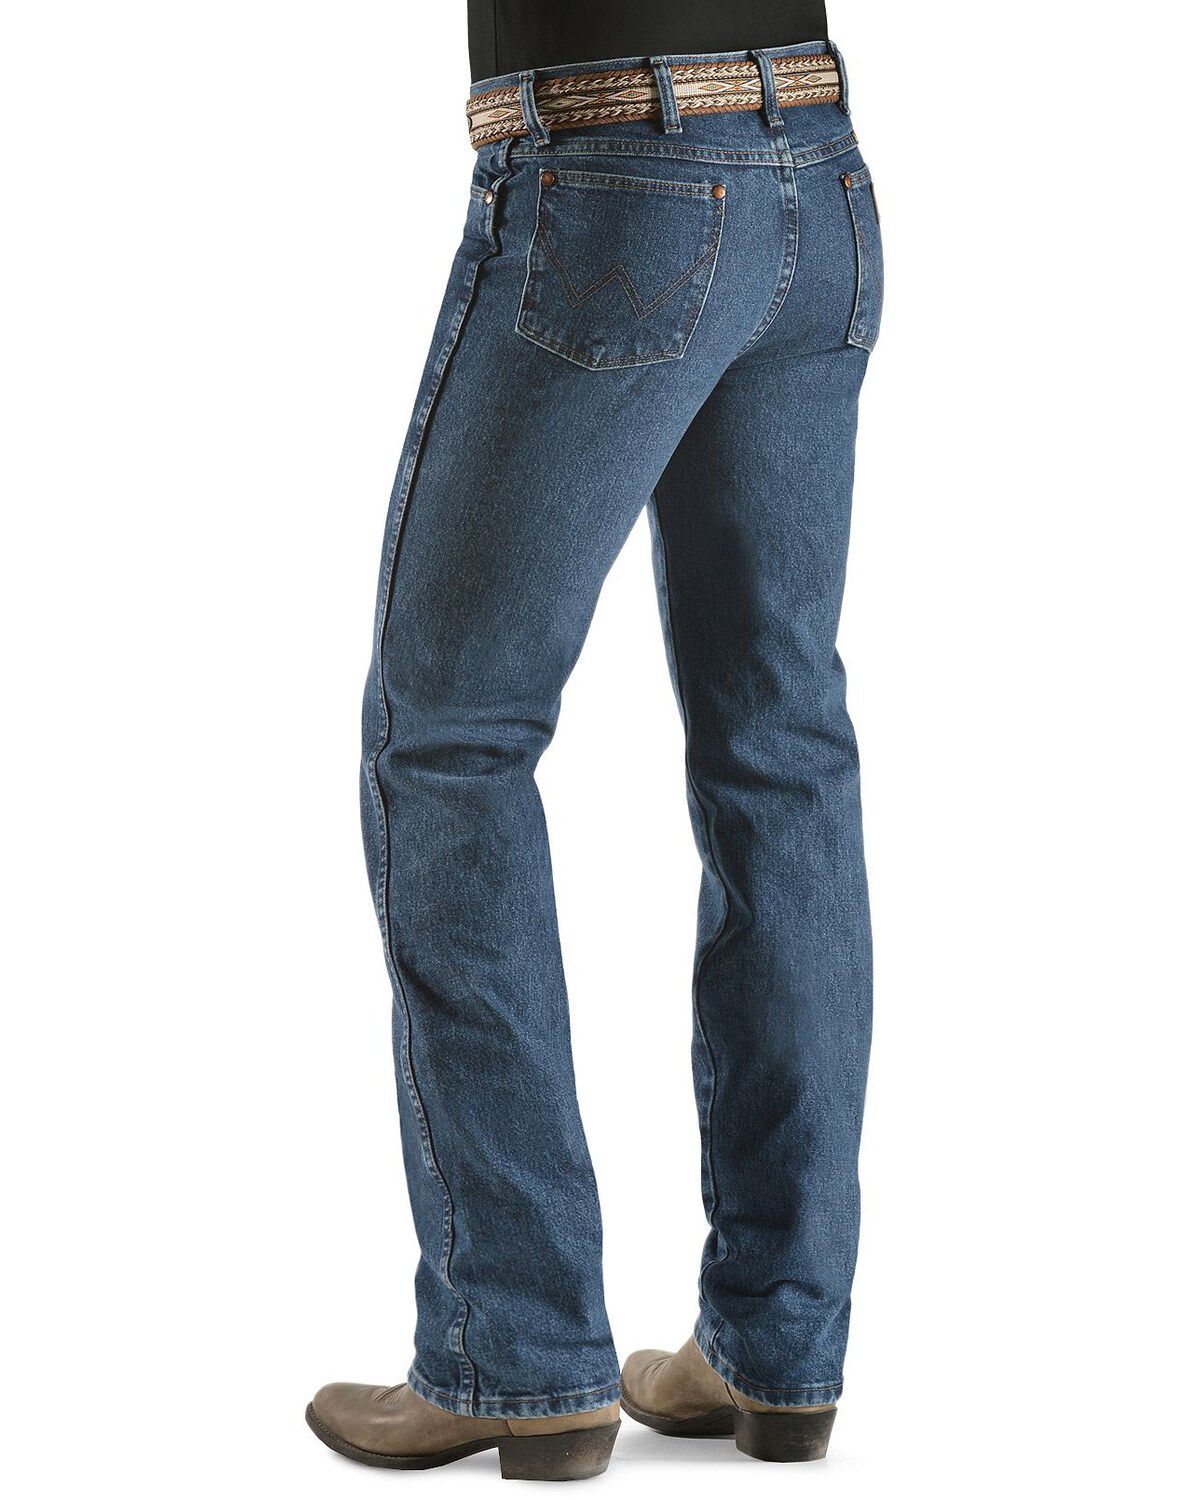 wrangler 1947 limited edition jeans